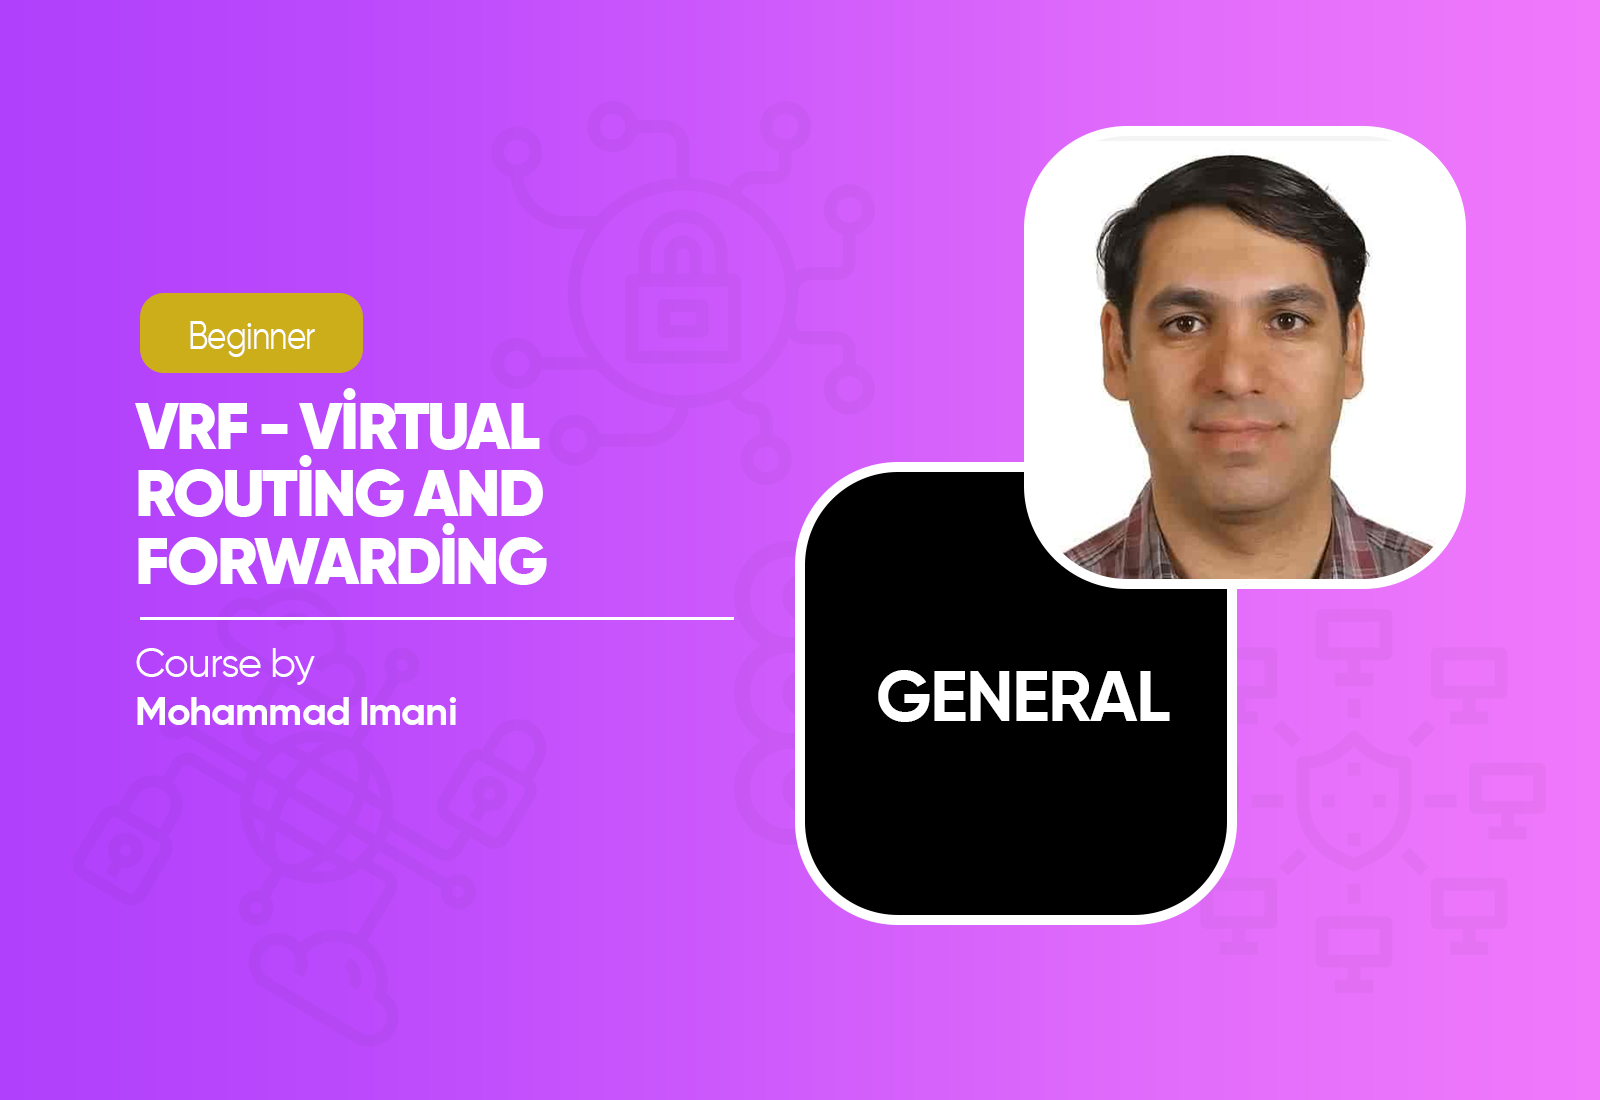 VRF - Virtual Routing and Forwarding Course